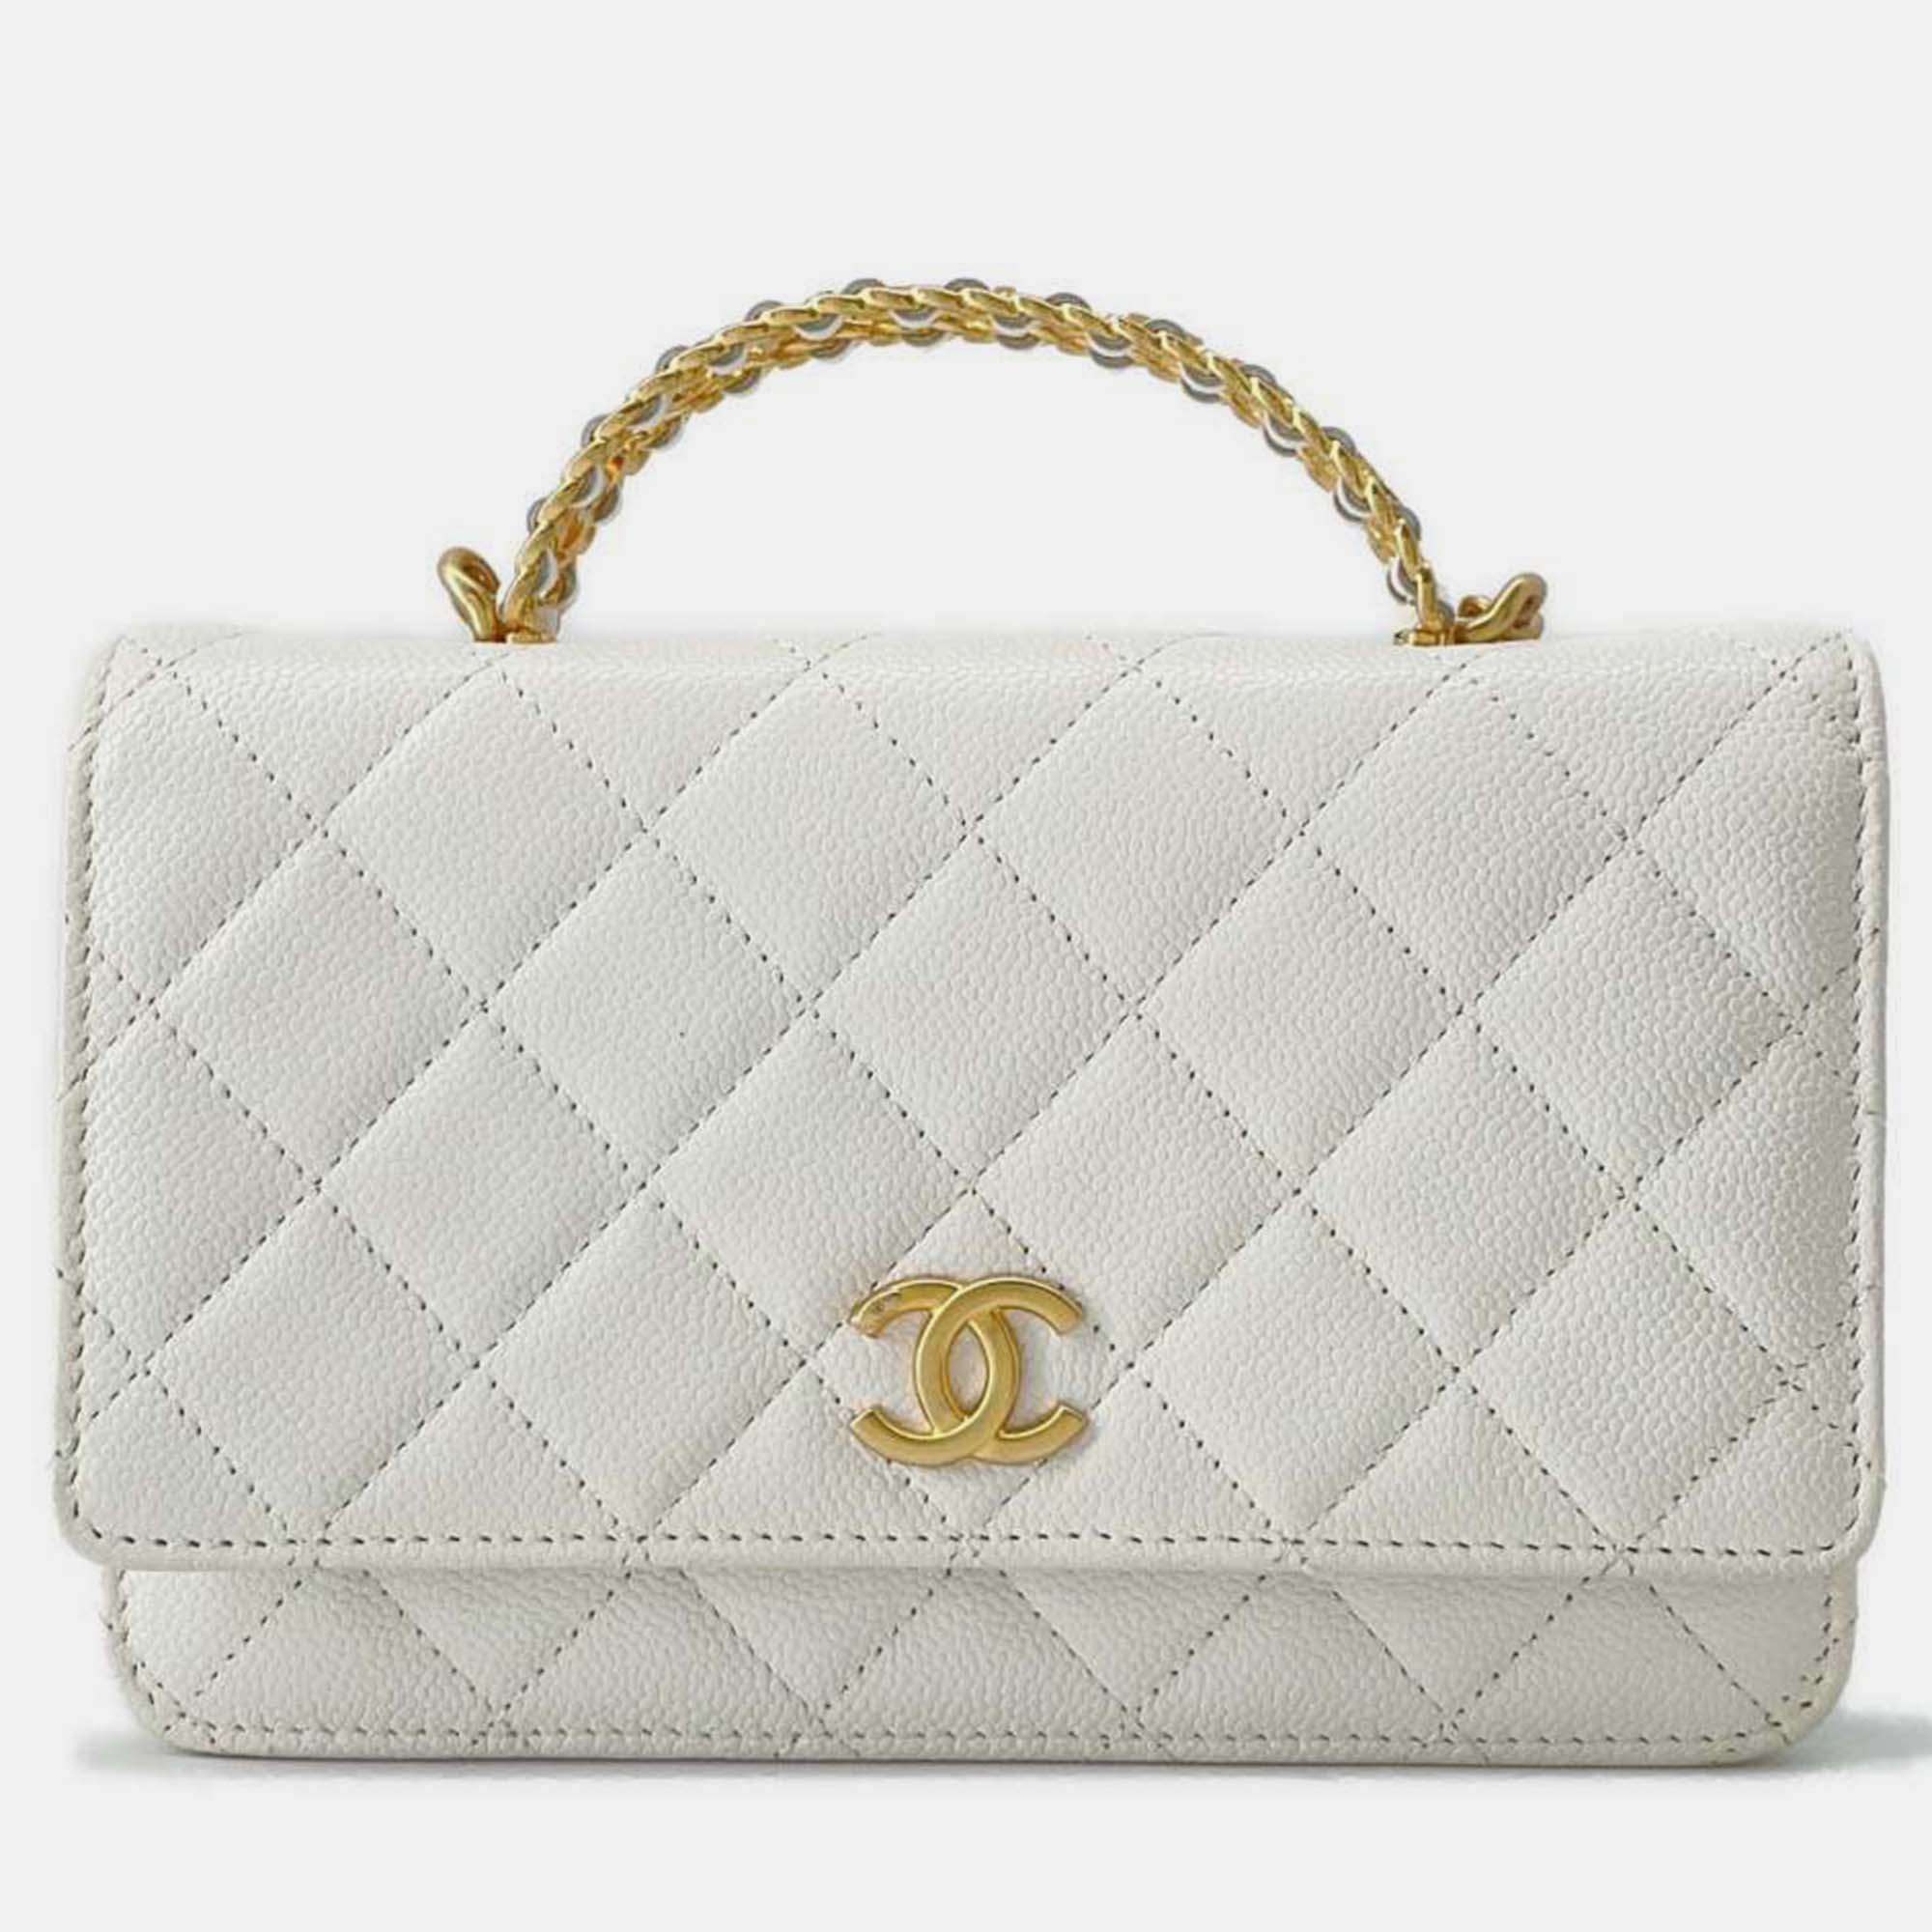 Chanel white caviar leather chain wallet on chain